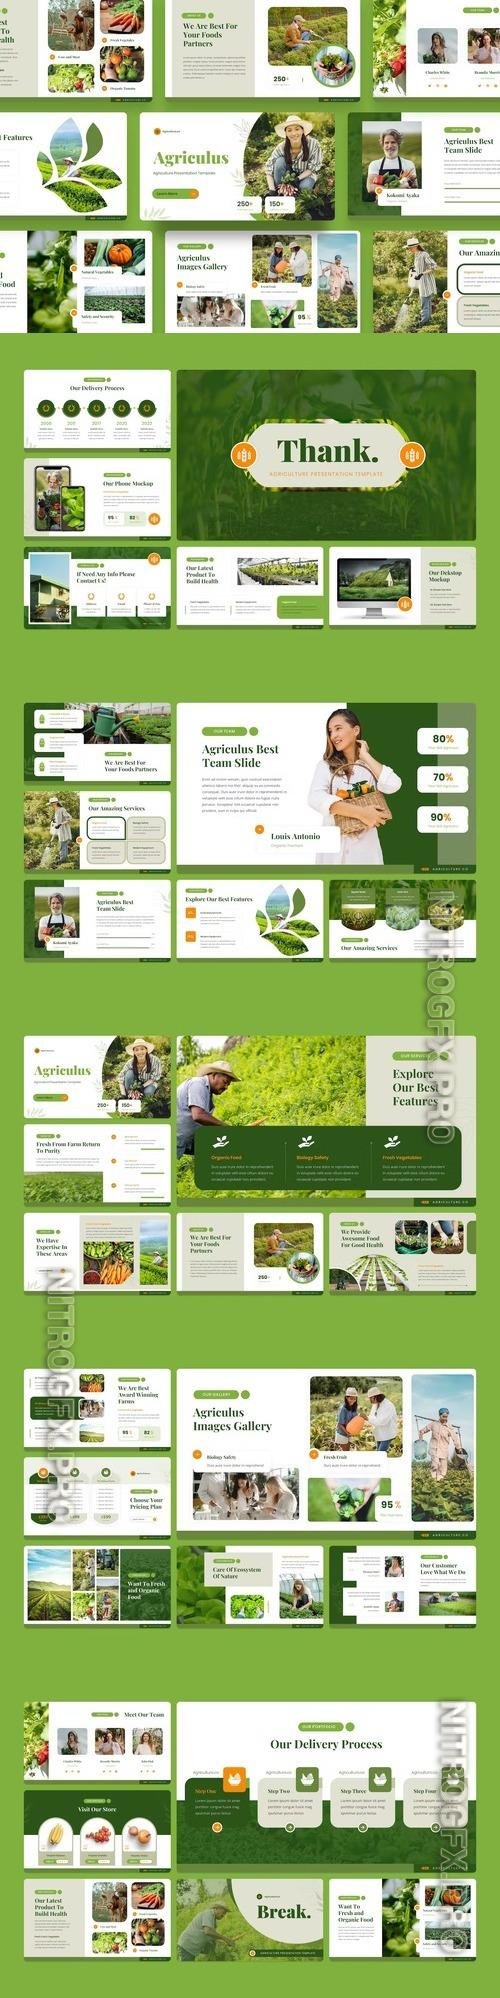 Agriculus - Agriculture Powerpoint, Keynote and Google Slides Template